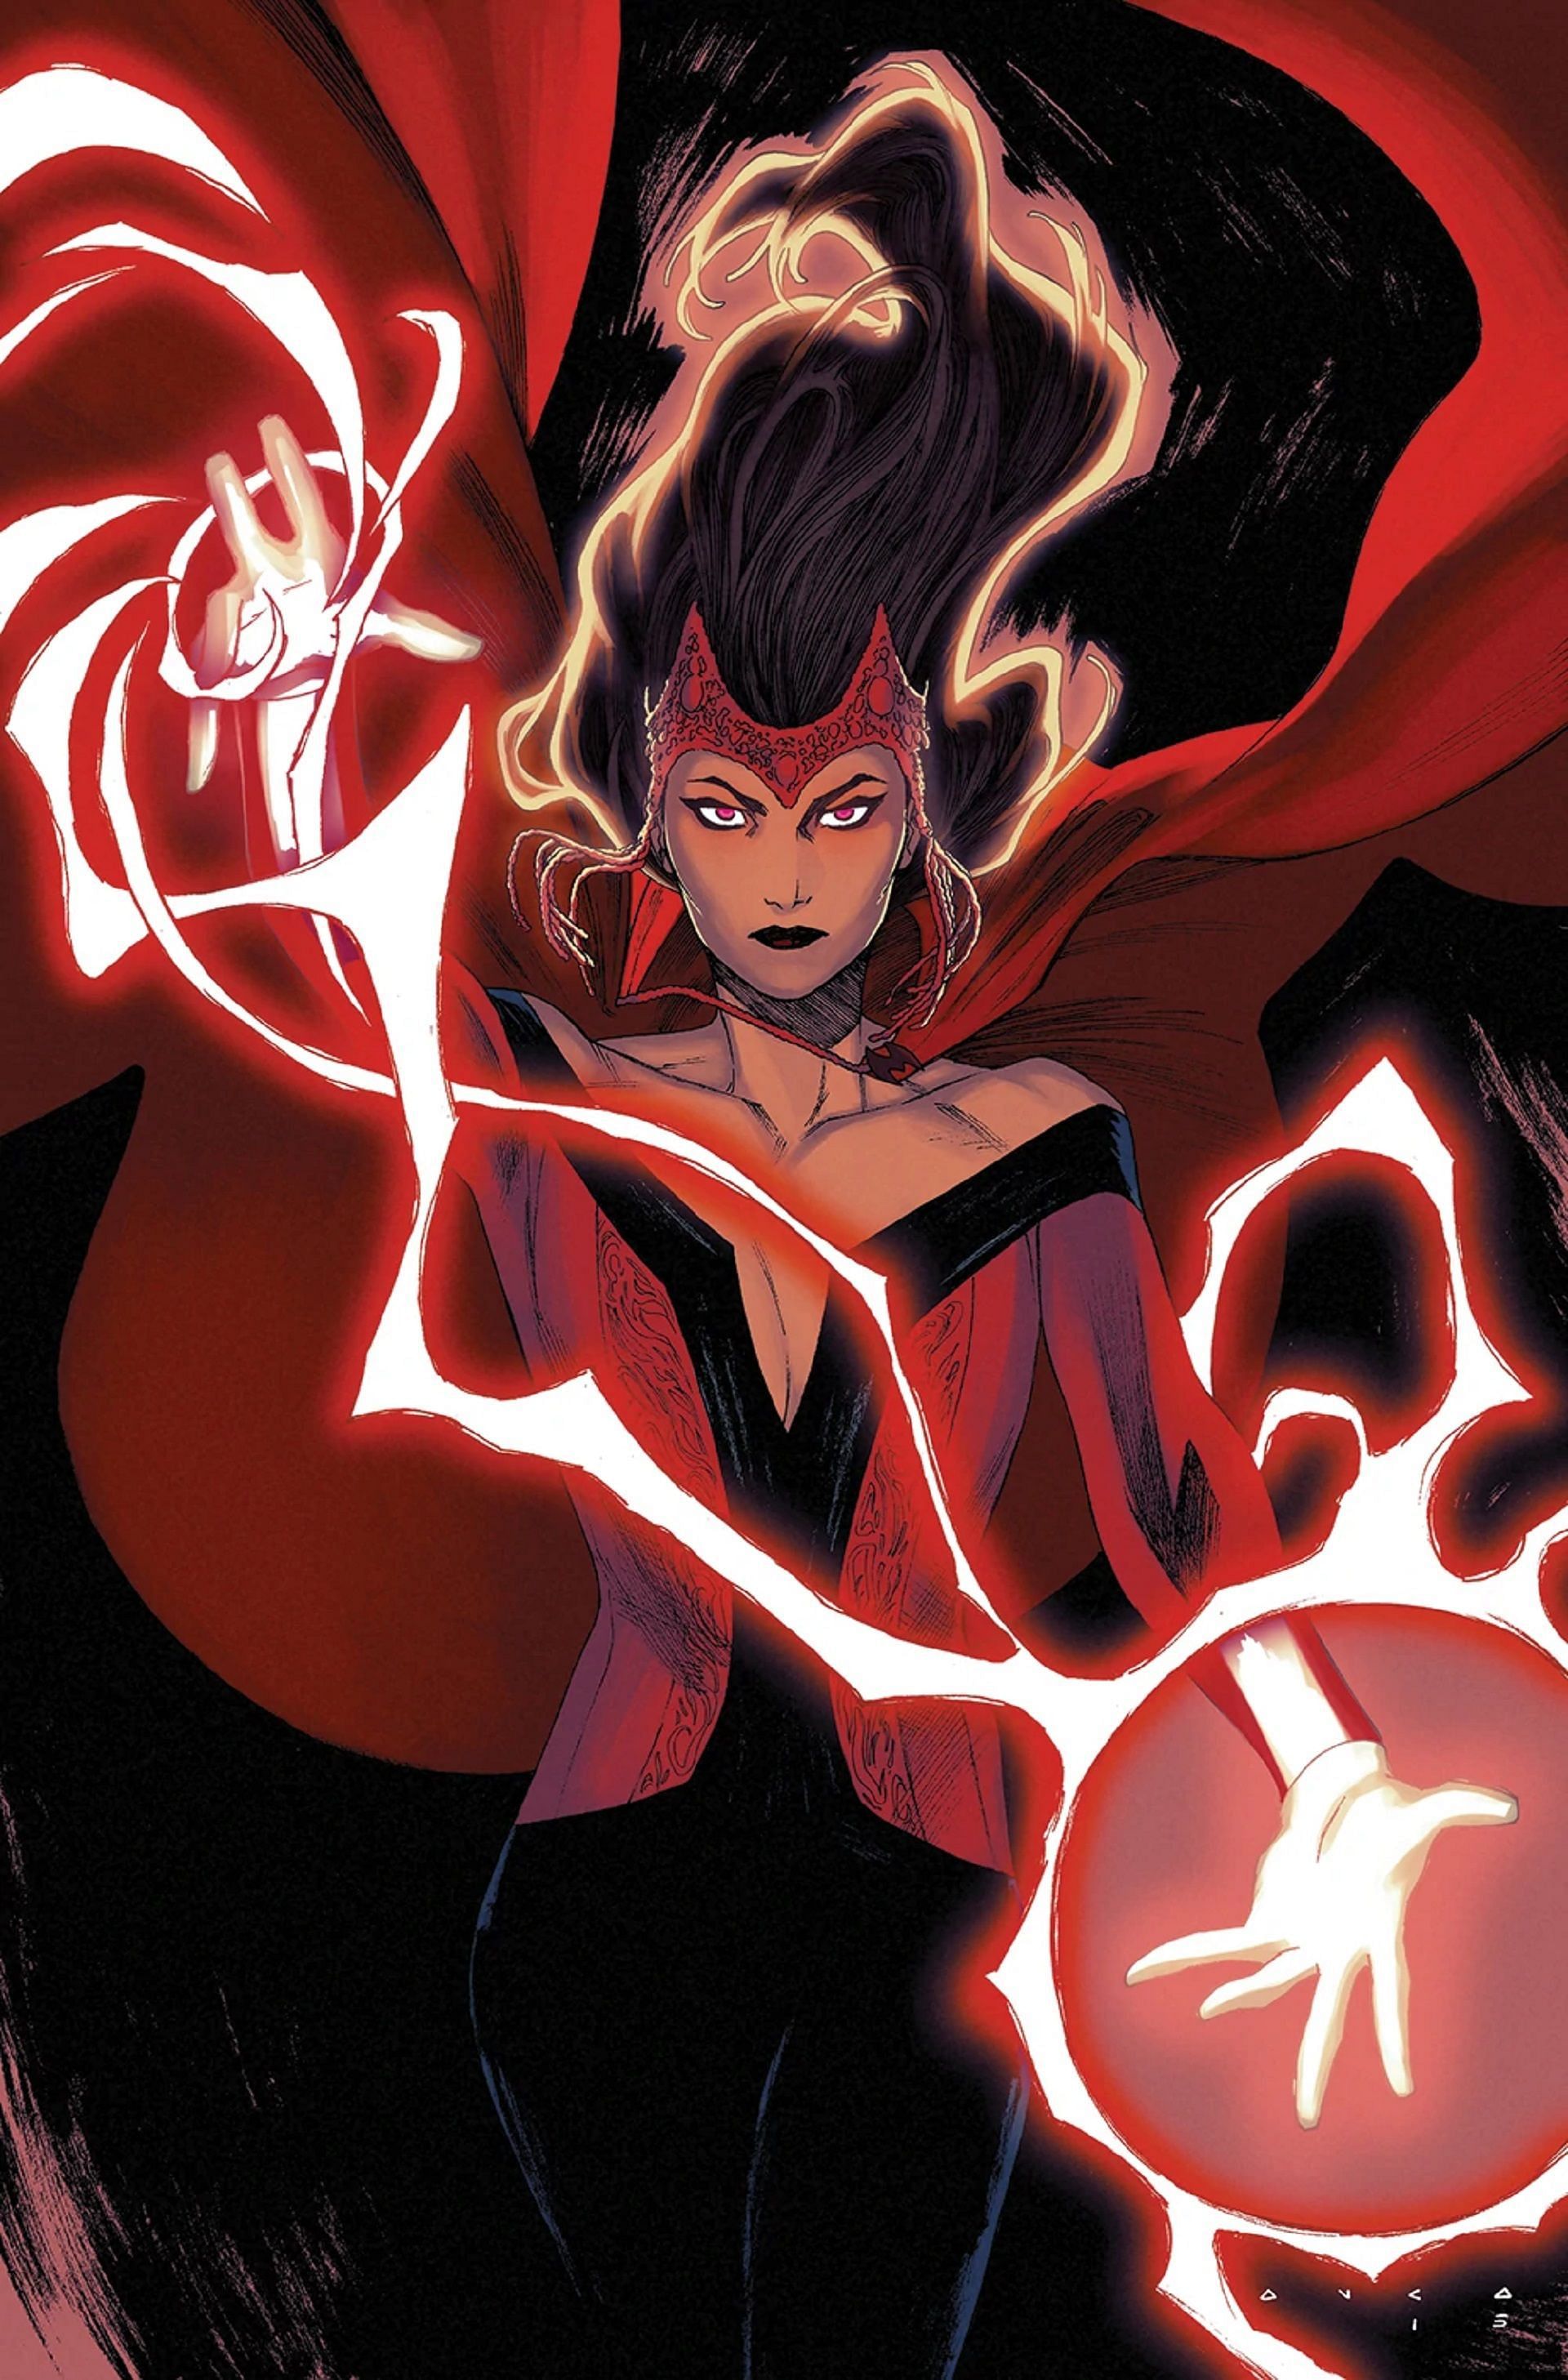 Scarlet Witch is one of the leading members of Avengers (Image via Marvel)